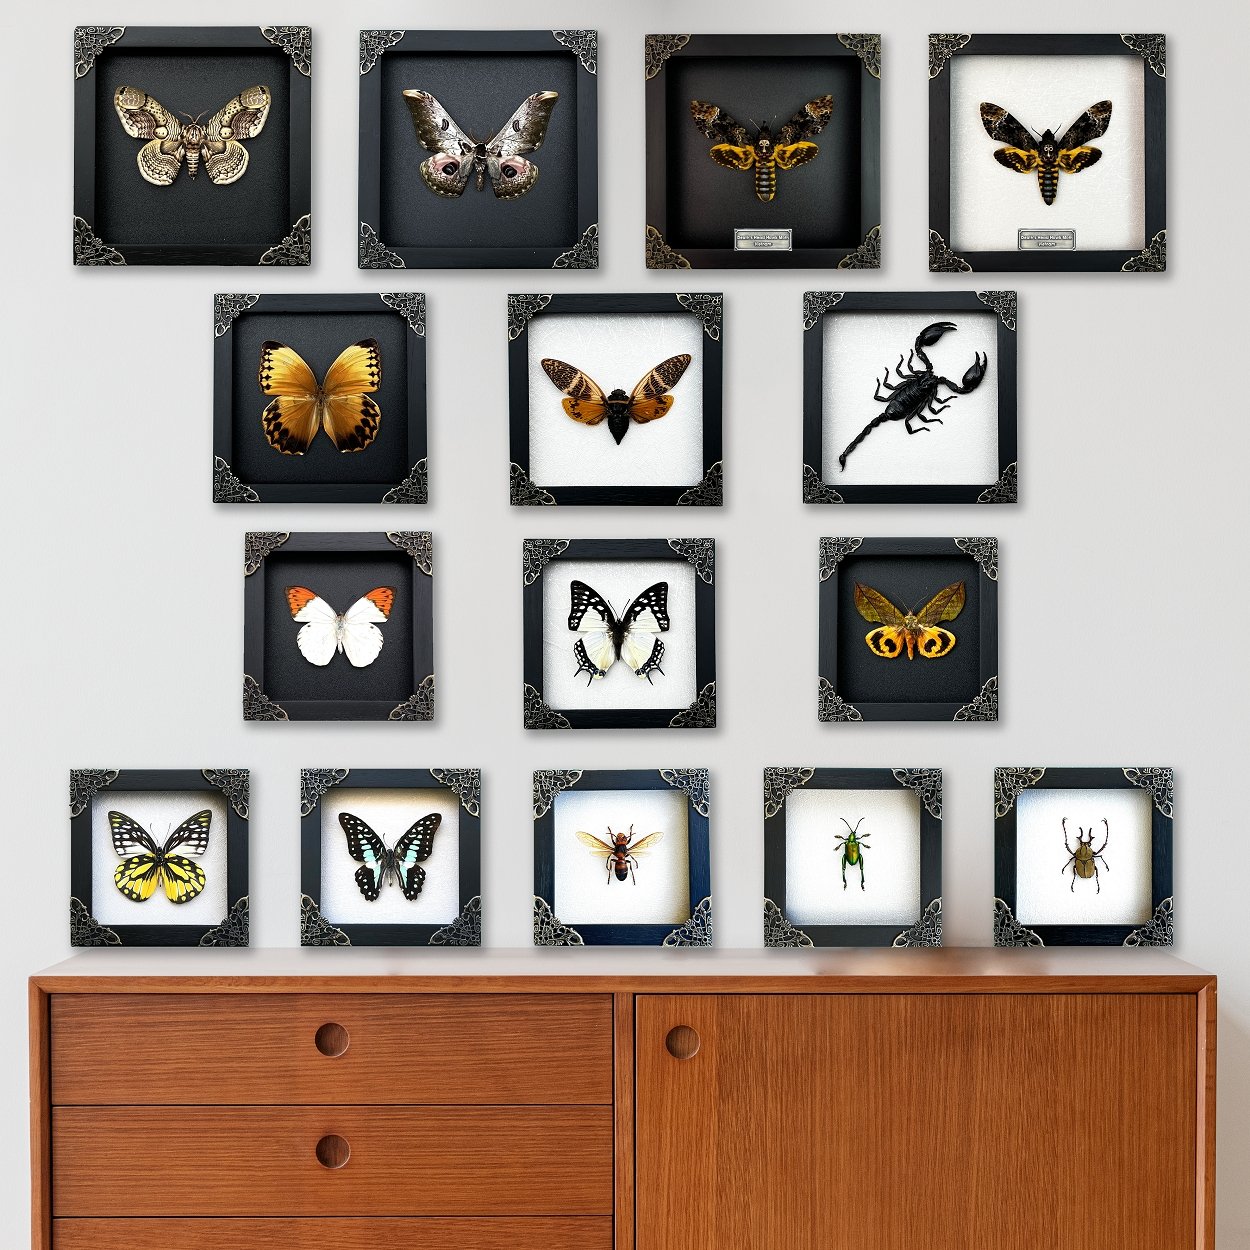 Real Framed Butterfly Black Wooden Shadow Box Dried Insect Lover Taxidermy Dead Bug Taxadermy Specimen Display Wall Art Hanging Decoration - Vinacreations